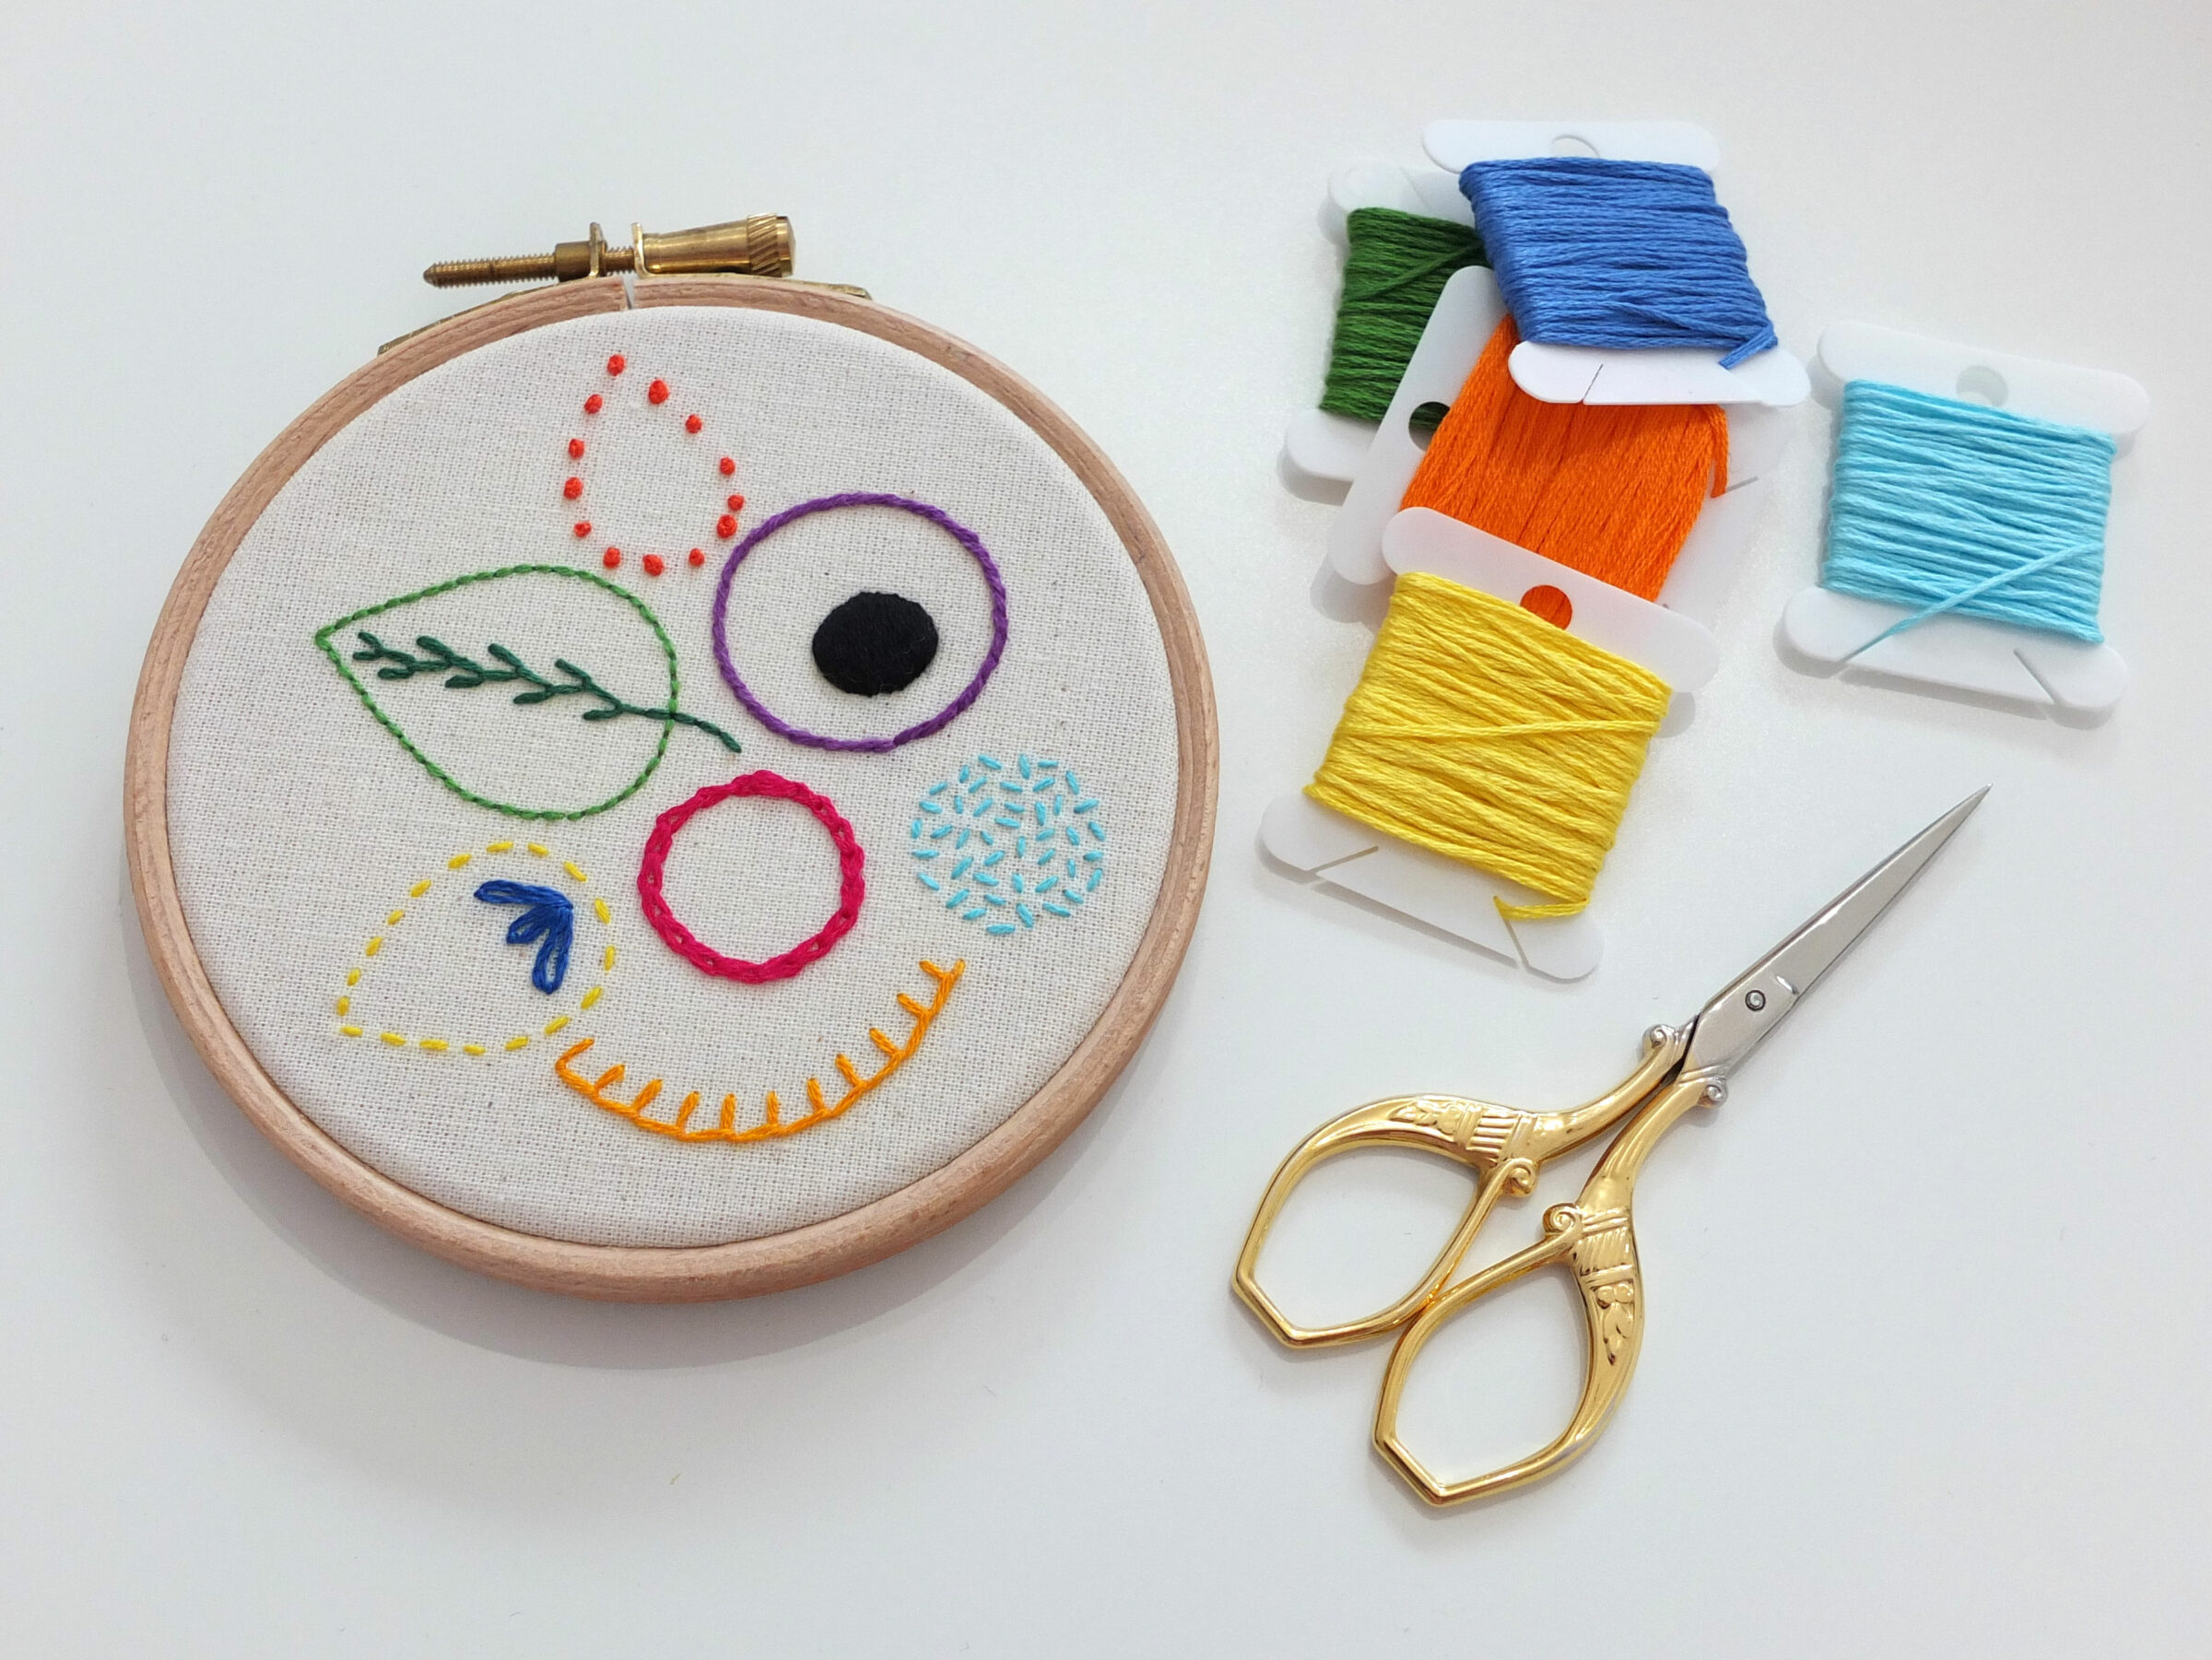 WORKSHOP: Intro To Hand Embroidery – Crescent Arts